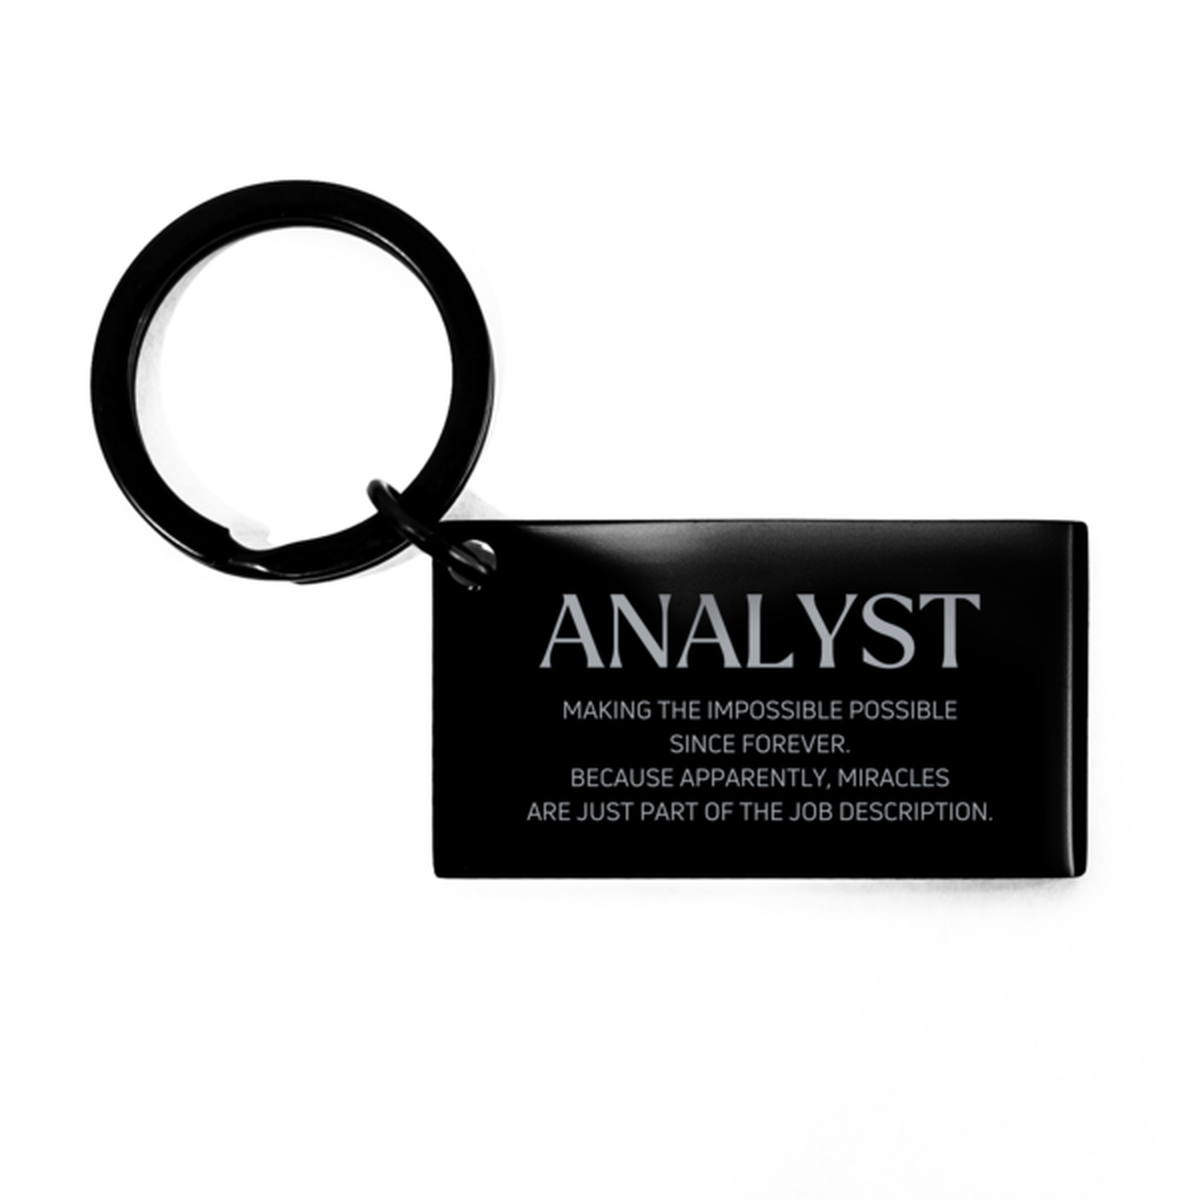 Funny Analyst Gifts, Miracles are just part of the job description, Inspirational Birthday Keychain For Analyst, Men, Women, Coworkers, Friends, Boss